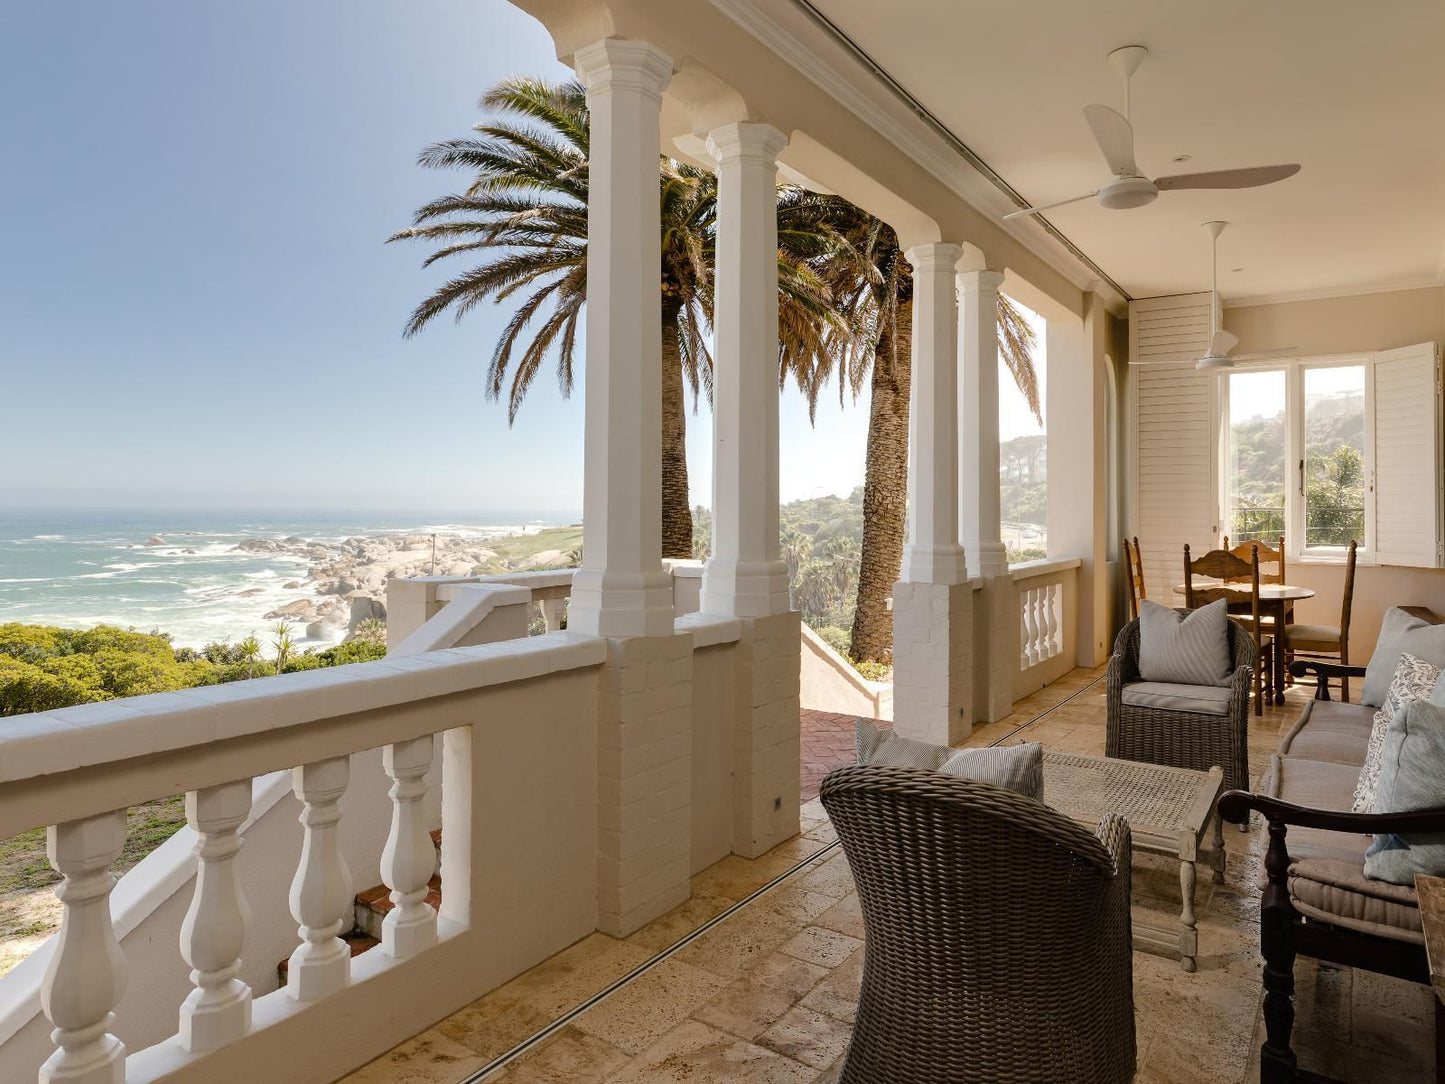 Claybrook Camps Bay Cape Town Western Cape South Africa Balcony, Architecture, Beach, Nature, Sand, Palm Tree, Plant, Wood